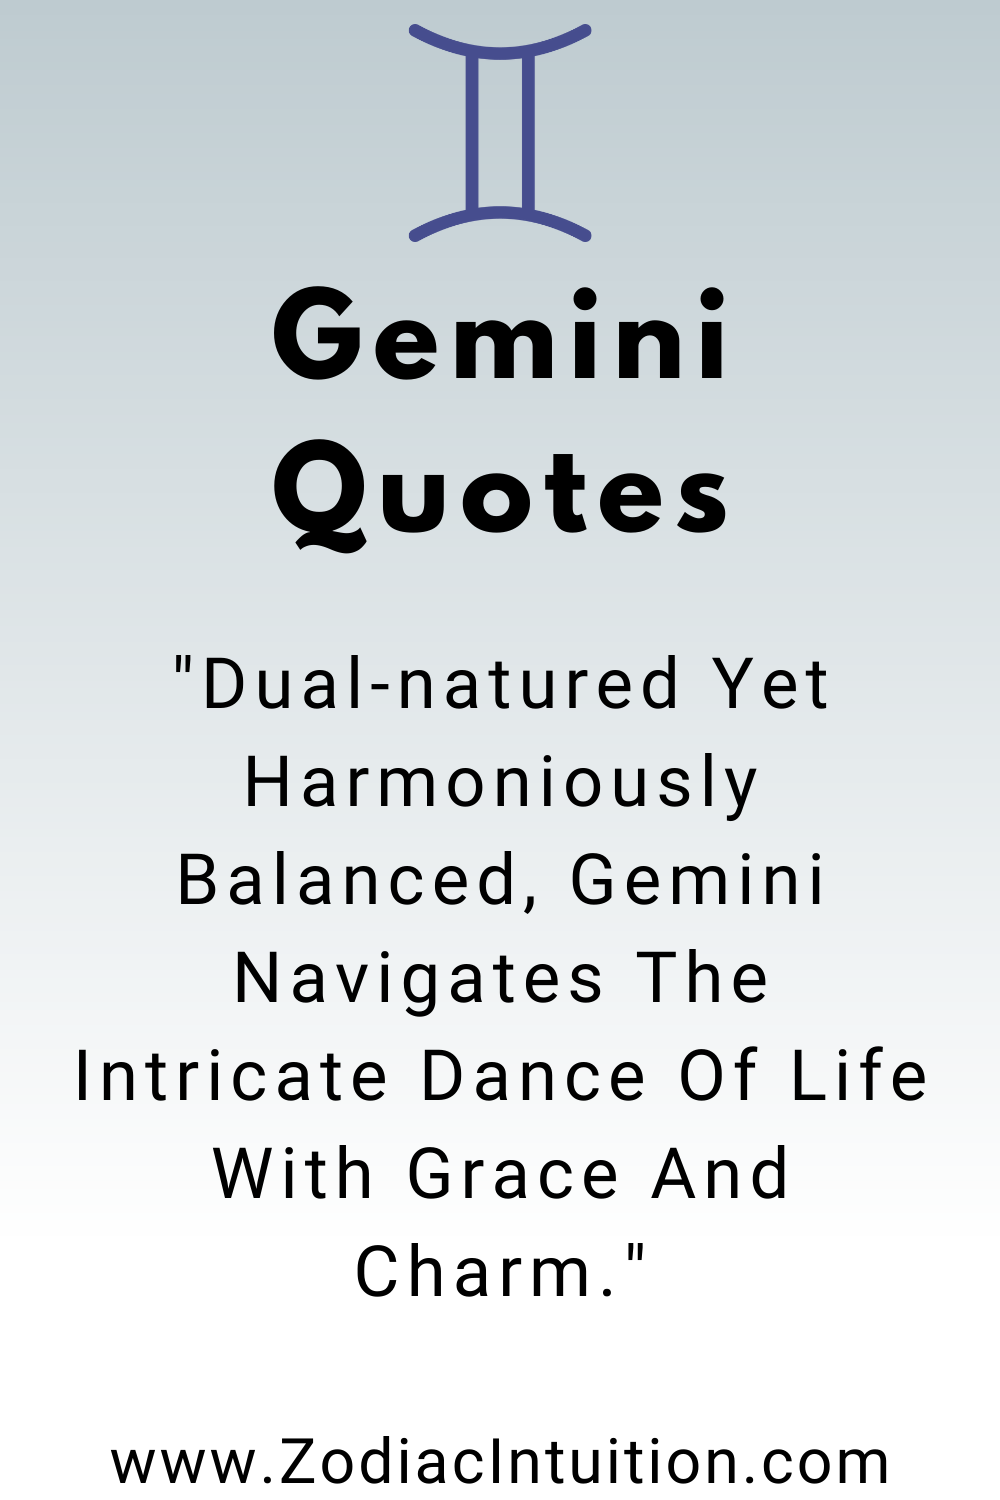 Top 5 Gemini Quotes And Inspiration